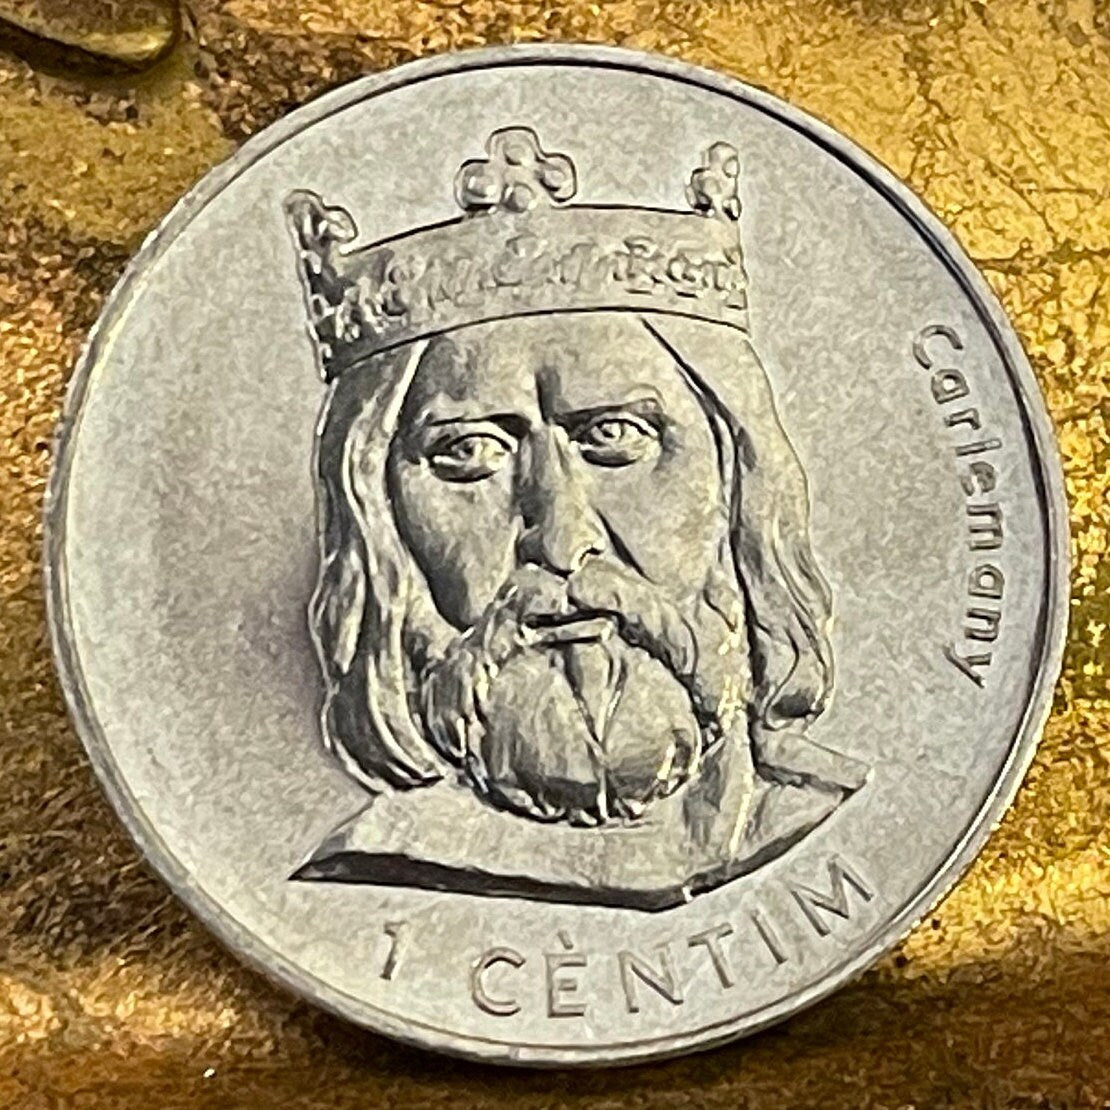 Emperor Charlemagne 1 Centim Andorra Authentic Coin Money for Jewelry and Craft Making (Father of Europe) (Charles the Great)